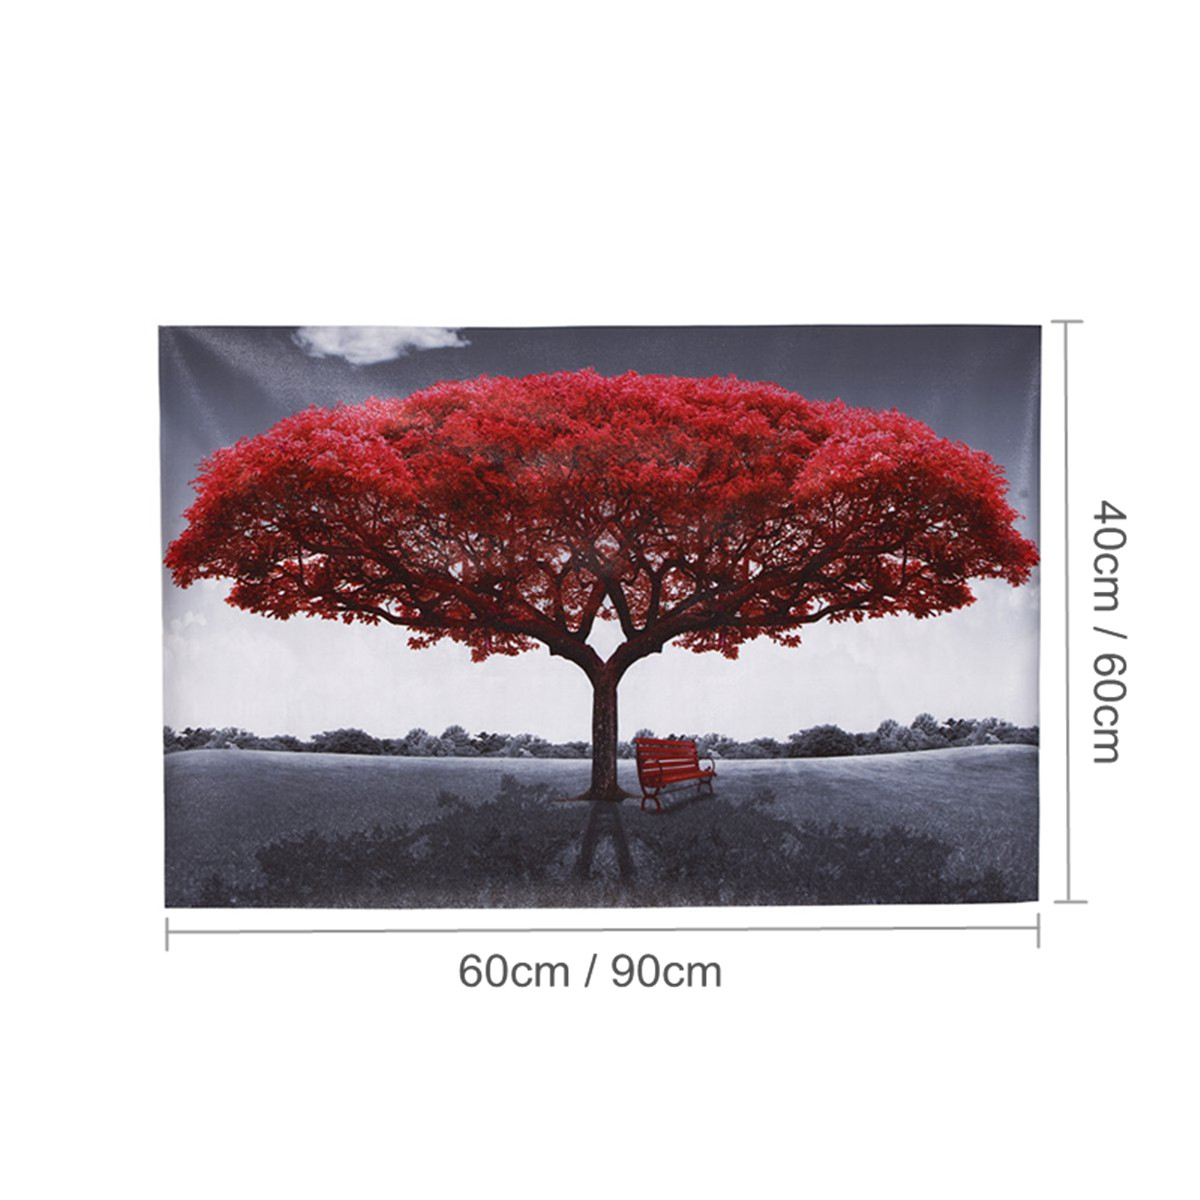 Large-Red-Tree-Canvas-Modern-Home-Wall-Decor-Art-Paintings-Picture-Print-No-Frame-Home-Decorations-1337172